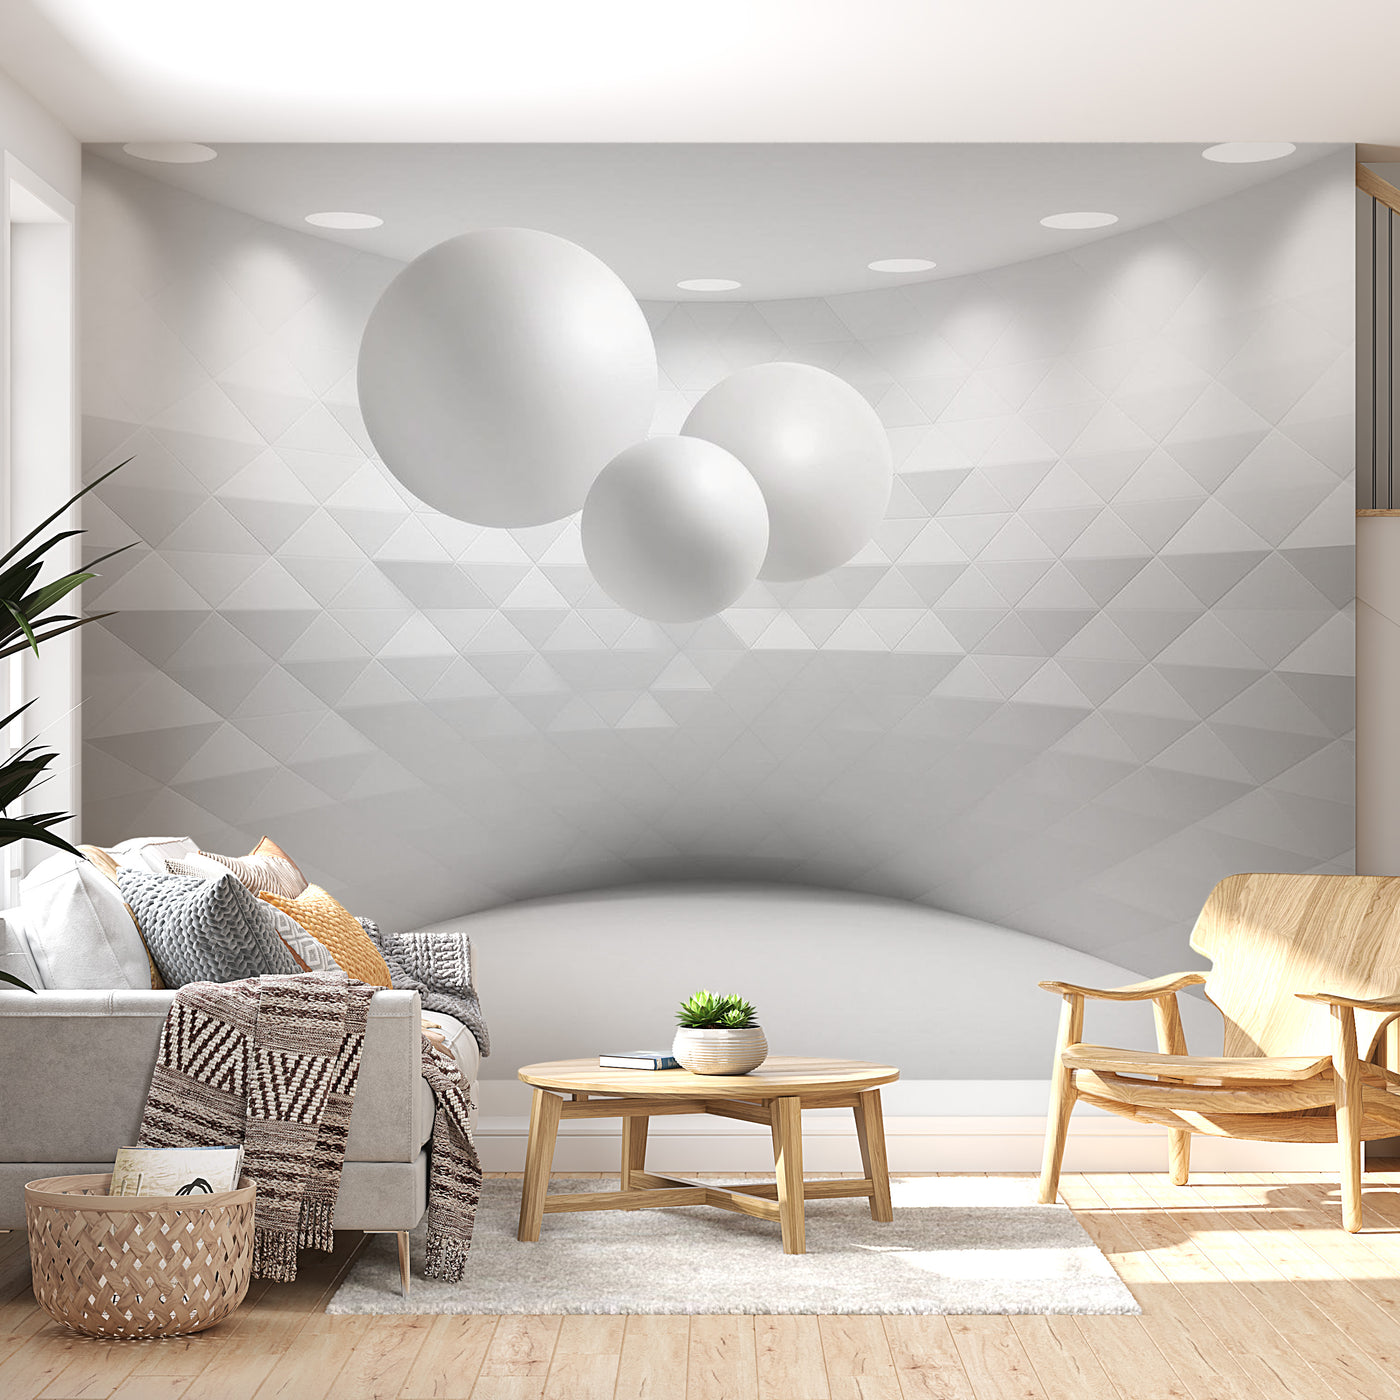 Peel & Stick 3D Illusion Wall Mural - Geometric Room - Removable Wall Decals